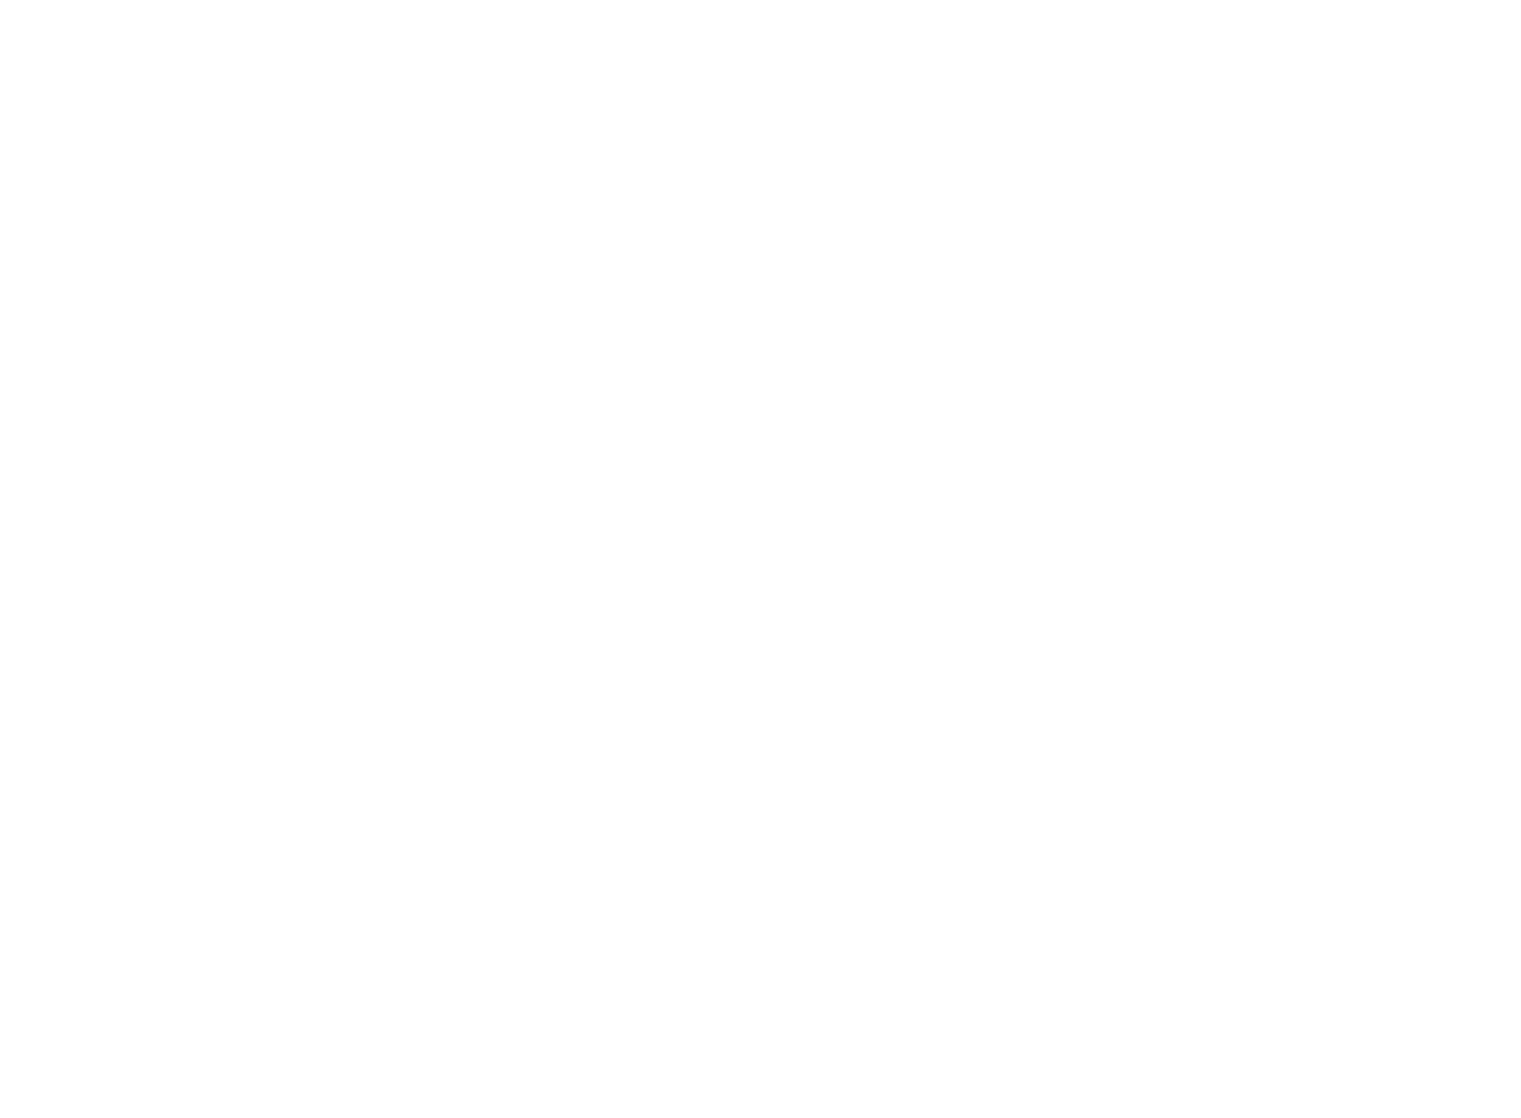 Produced by Kentucky Venues